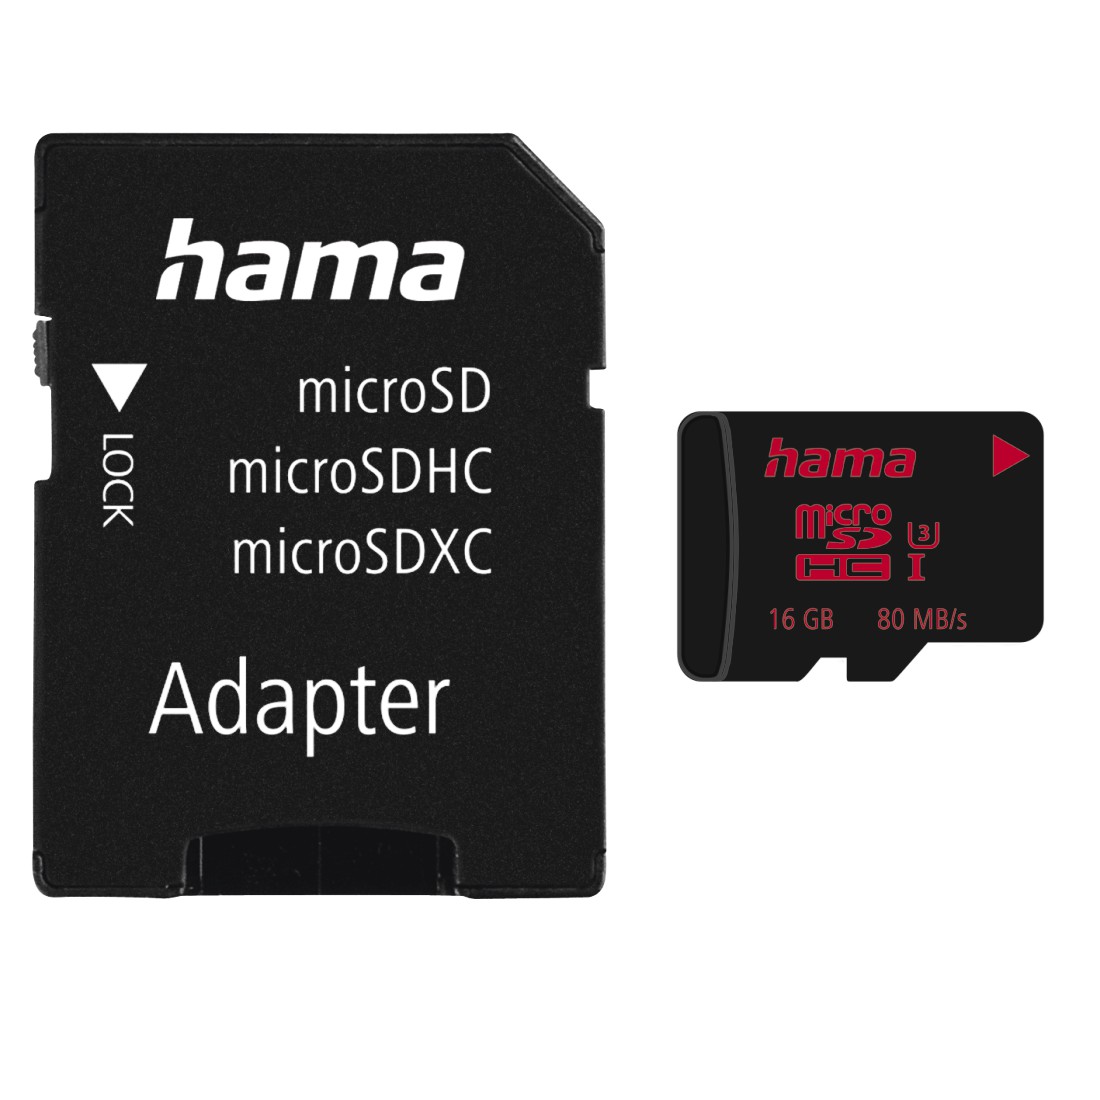 Hama microSDHC 16GB UHS Speed Class 3 UHS-I 80MB/s + Adapter/Mobile